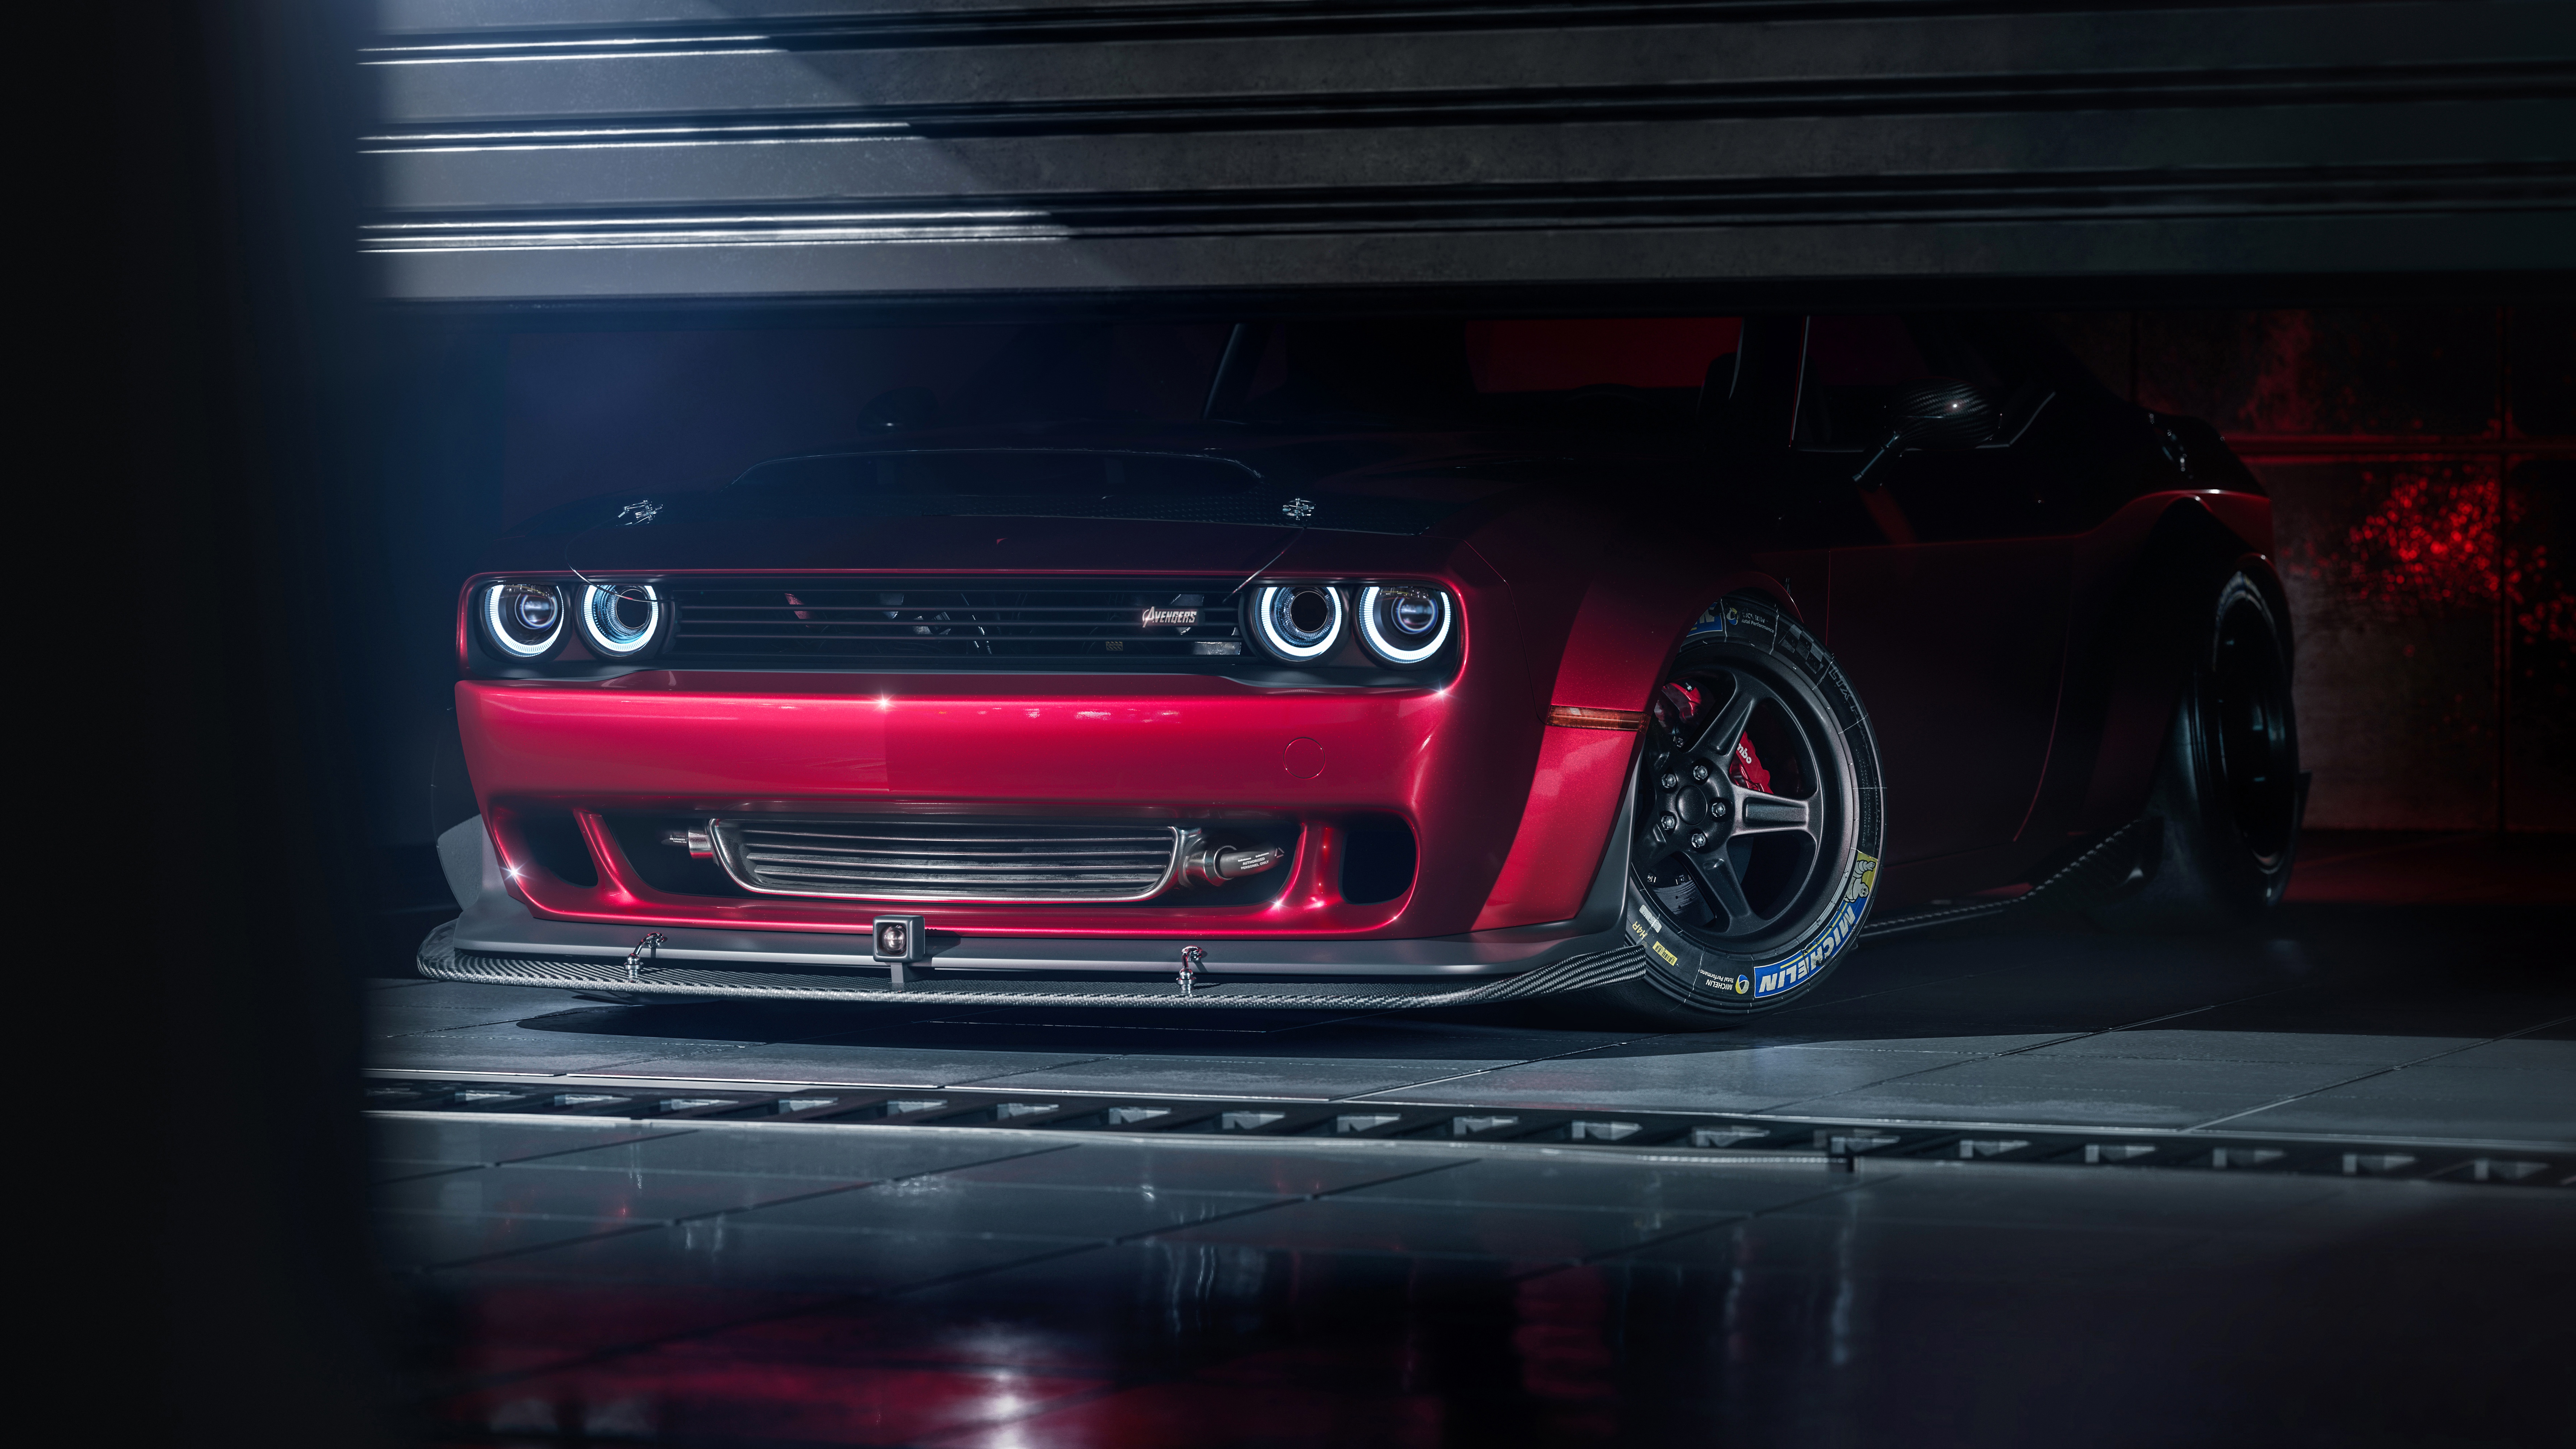 Dodge Challenger Dodge Muscle Cars American Cars Garage Tuning Car Front Angle View Reflection 7680x4320